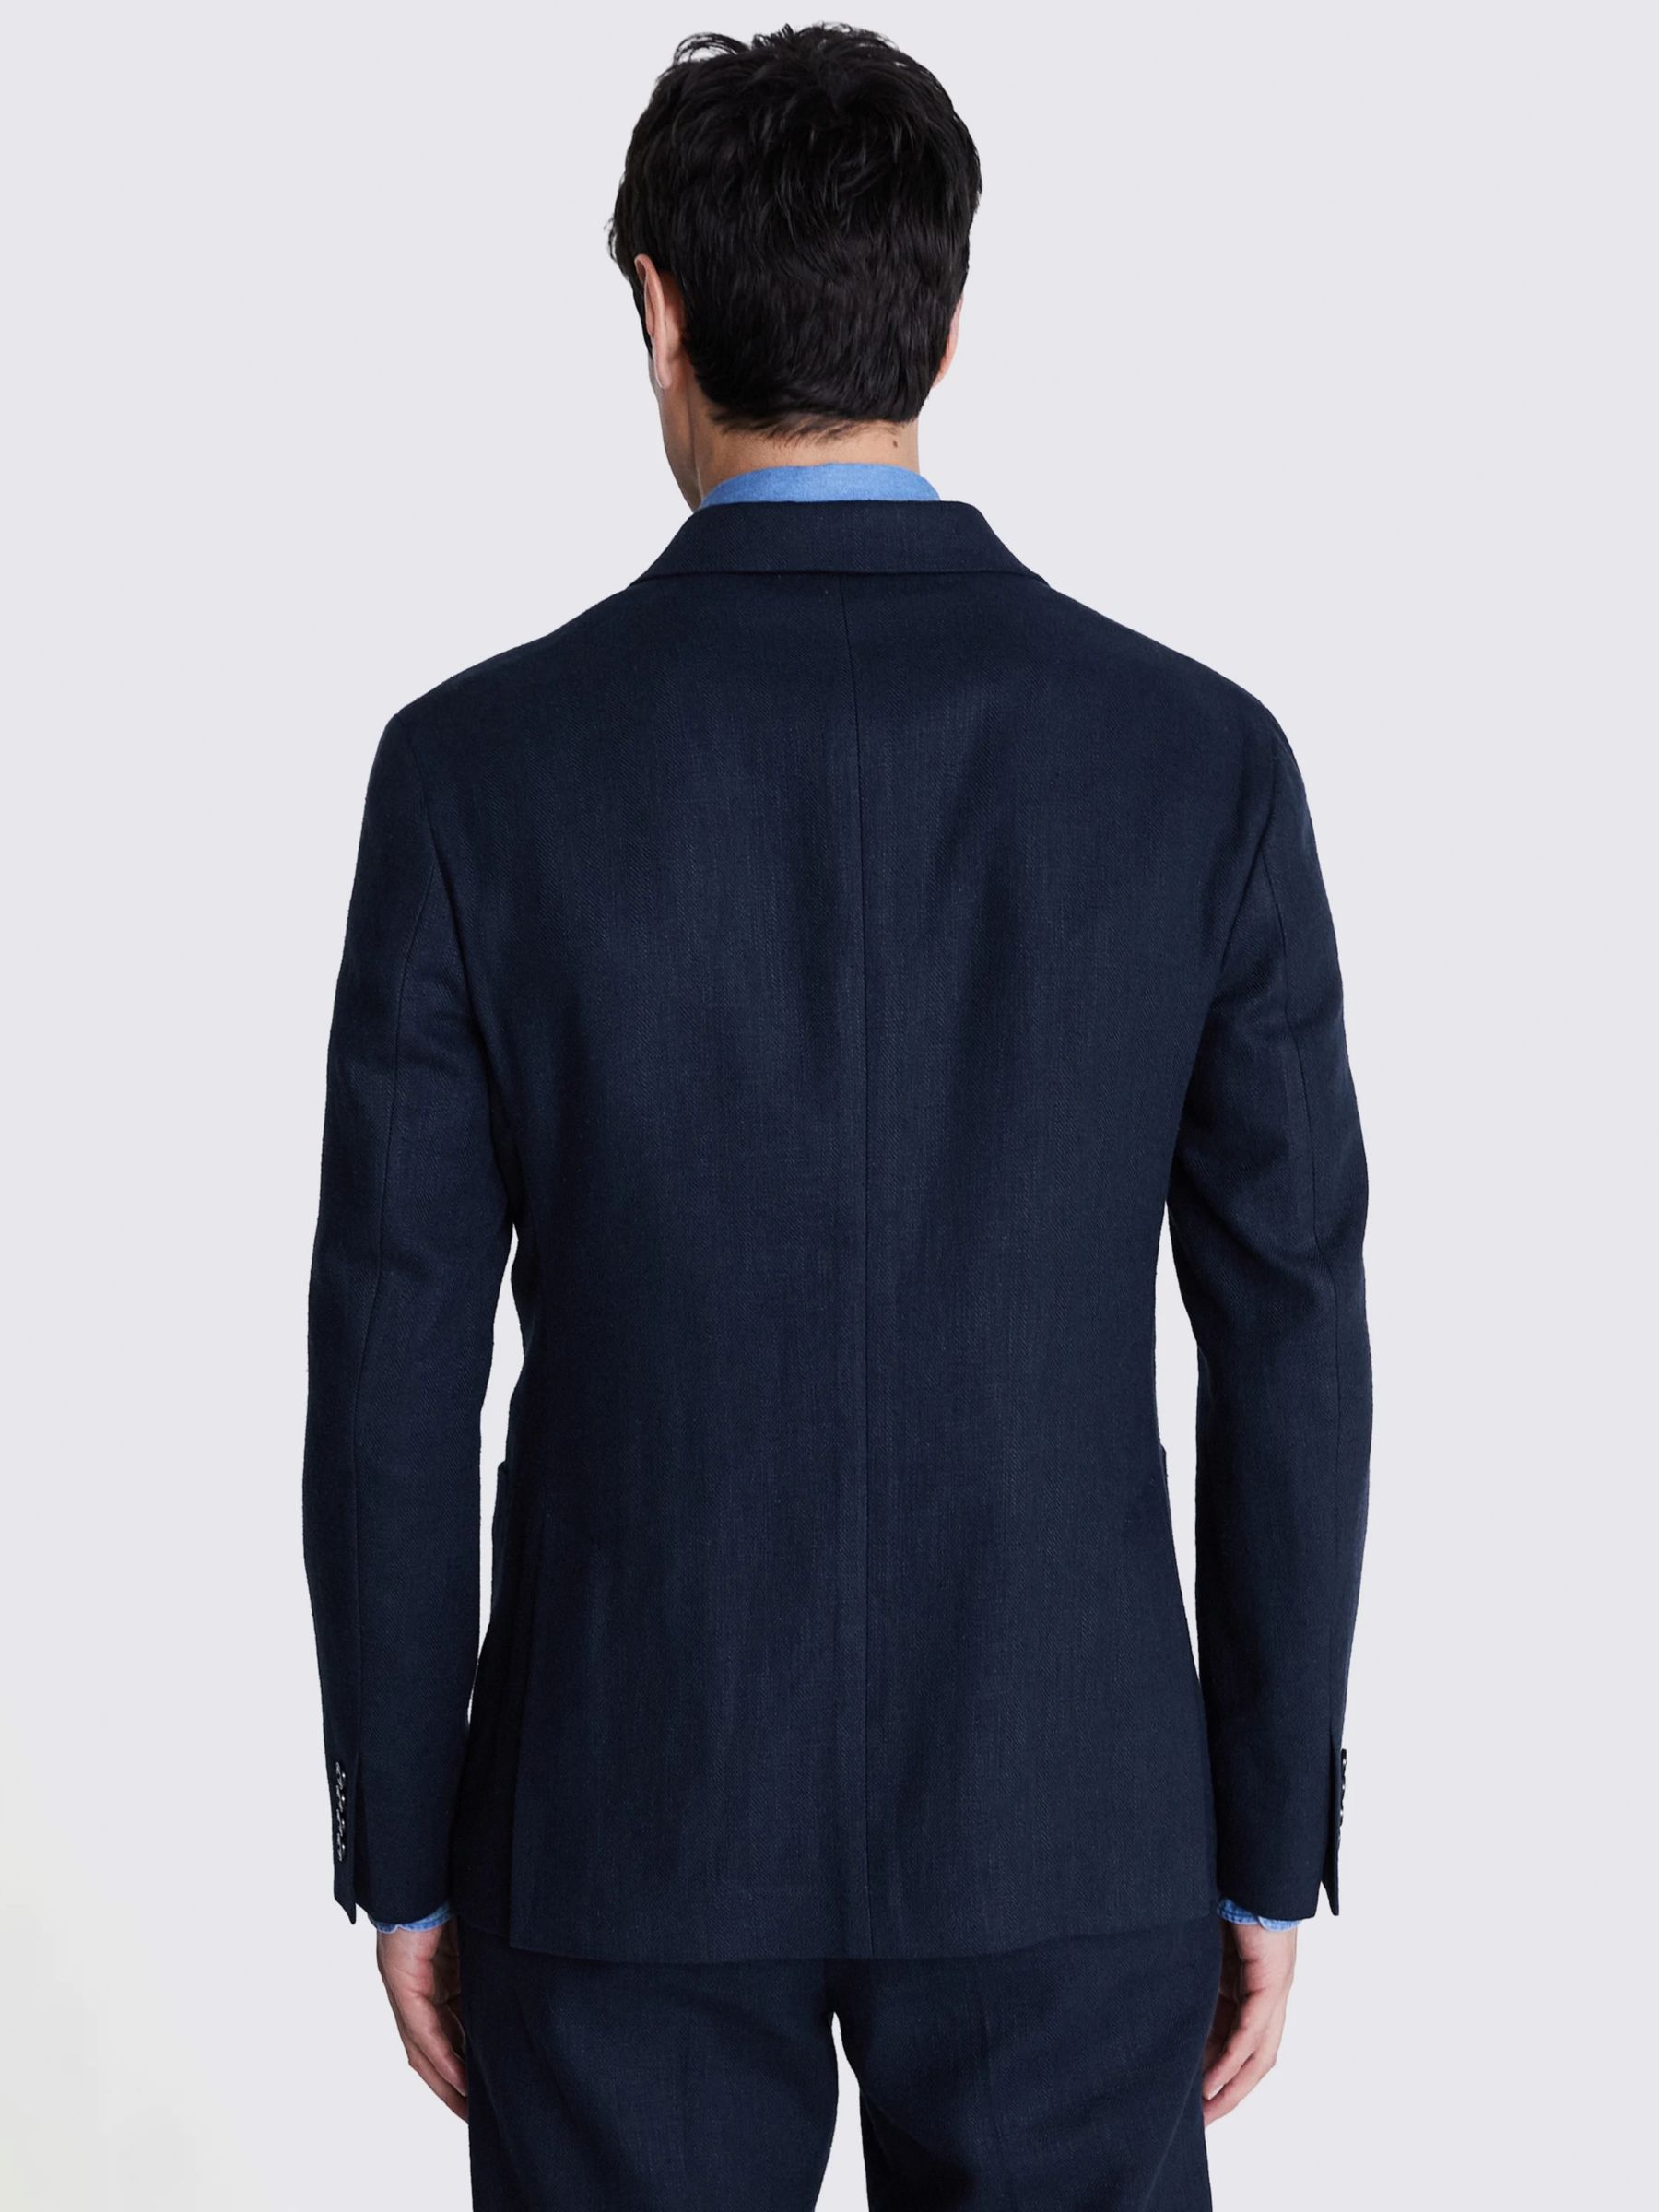 Buy Moss Tailored Fit Double Breasted Herringbone Suit Jacket, Navy Online at johnlewis.com